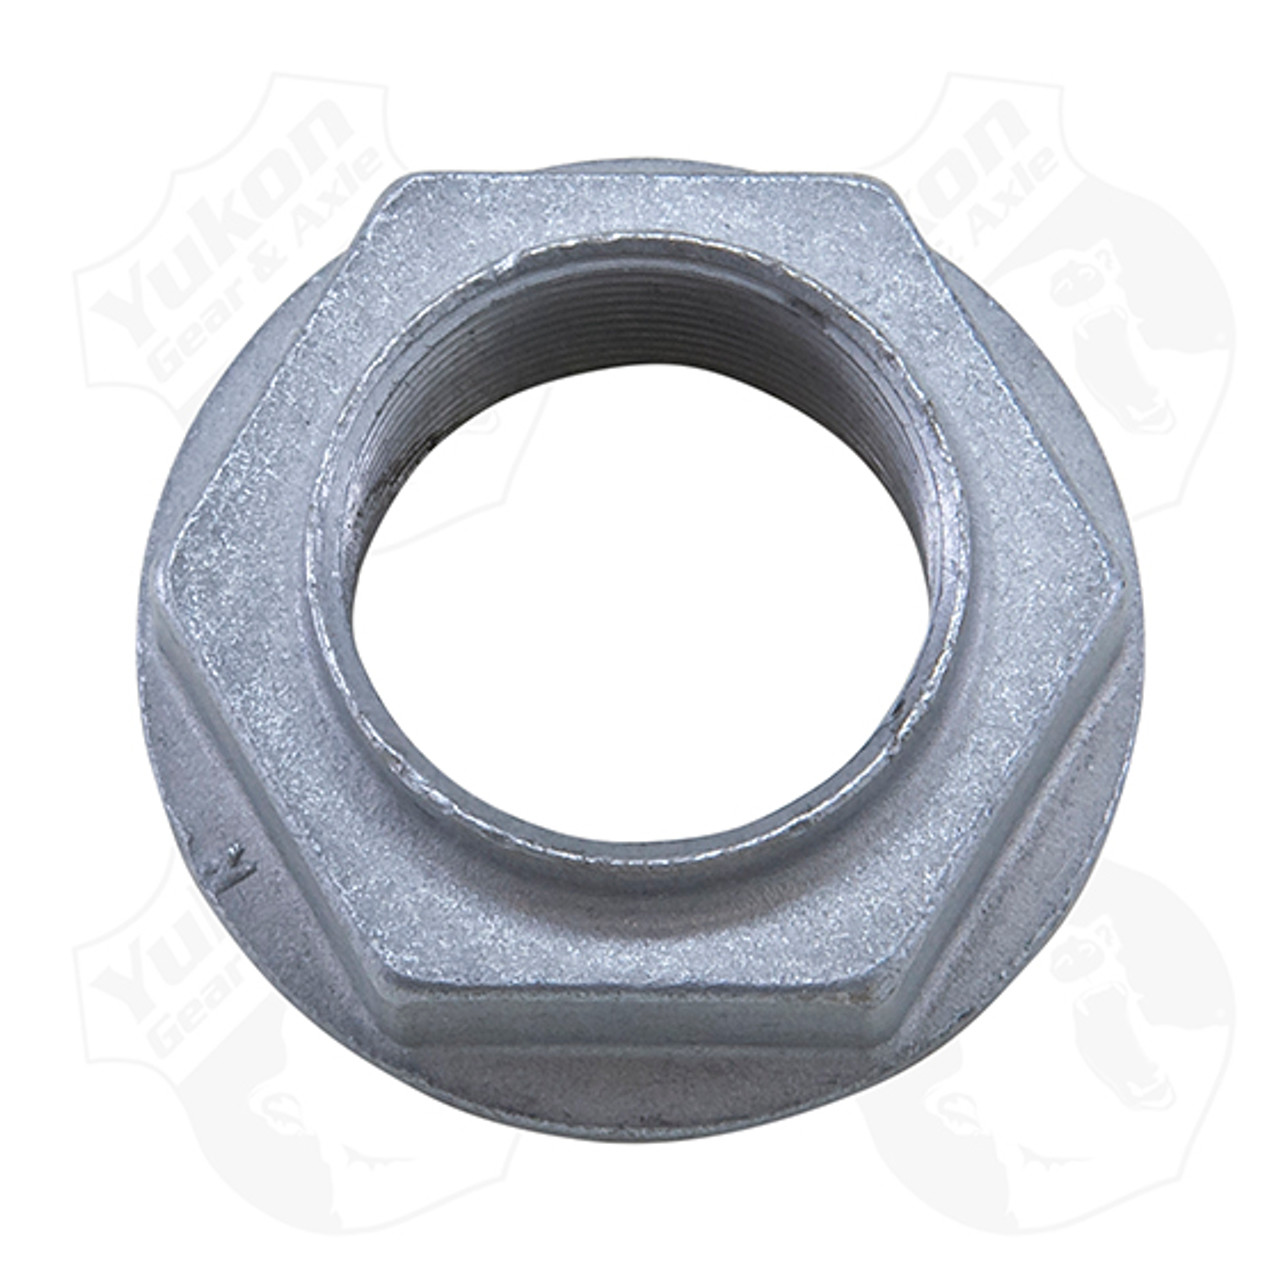 Pinion nut for Chrysler 300, Charger, Magnum.